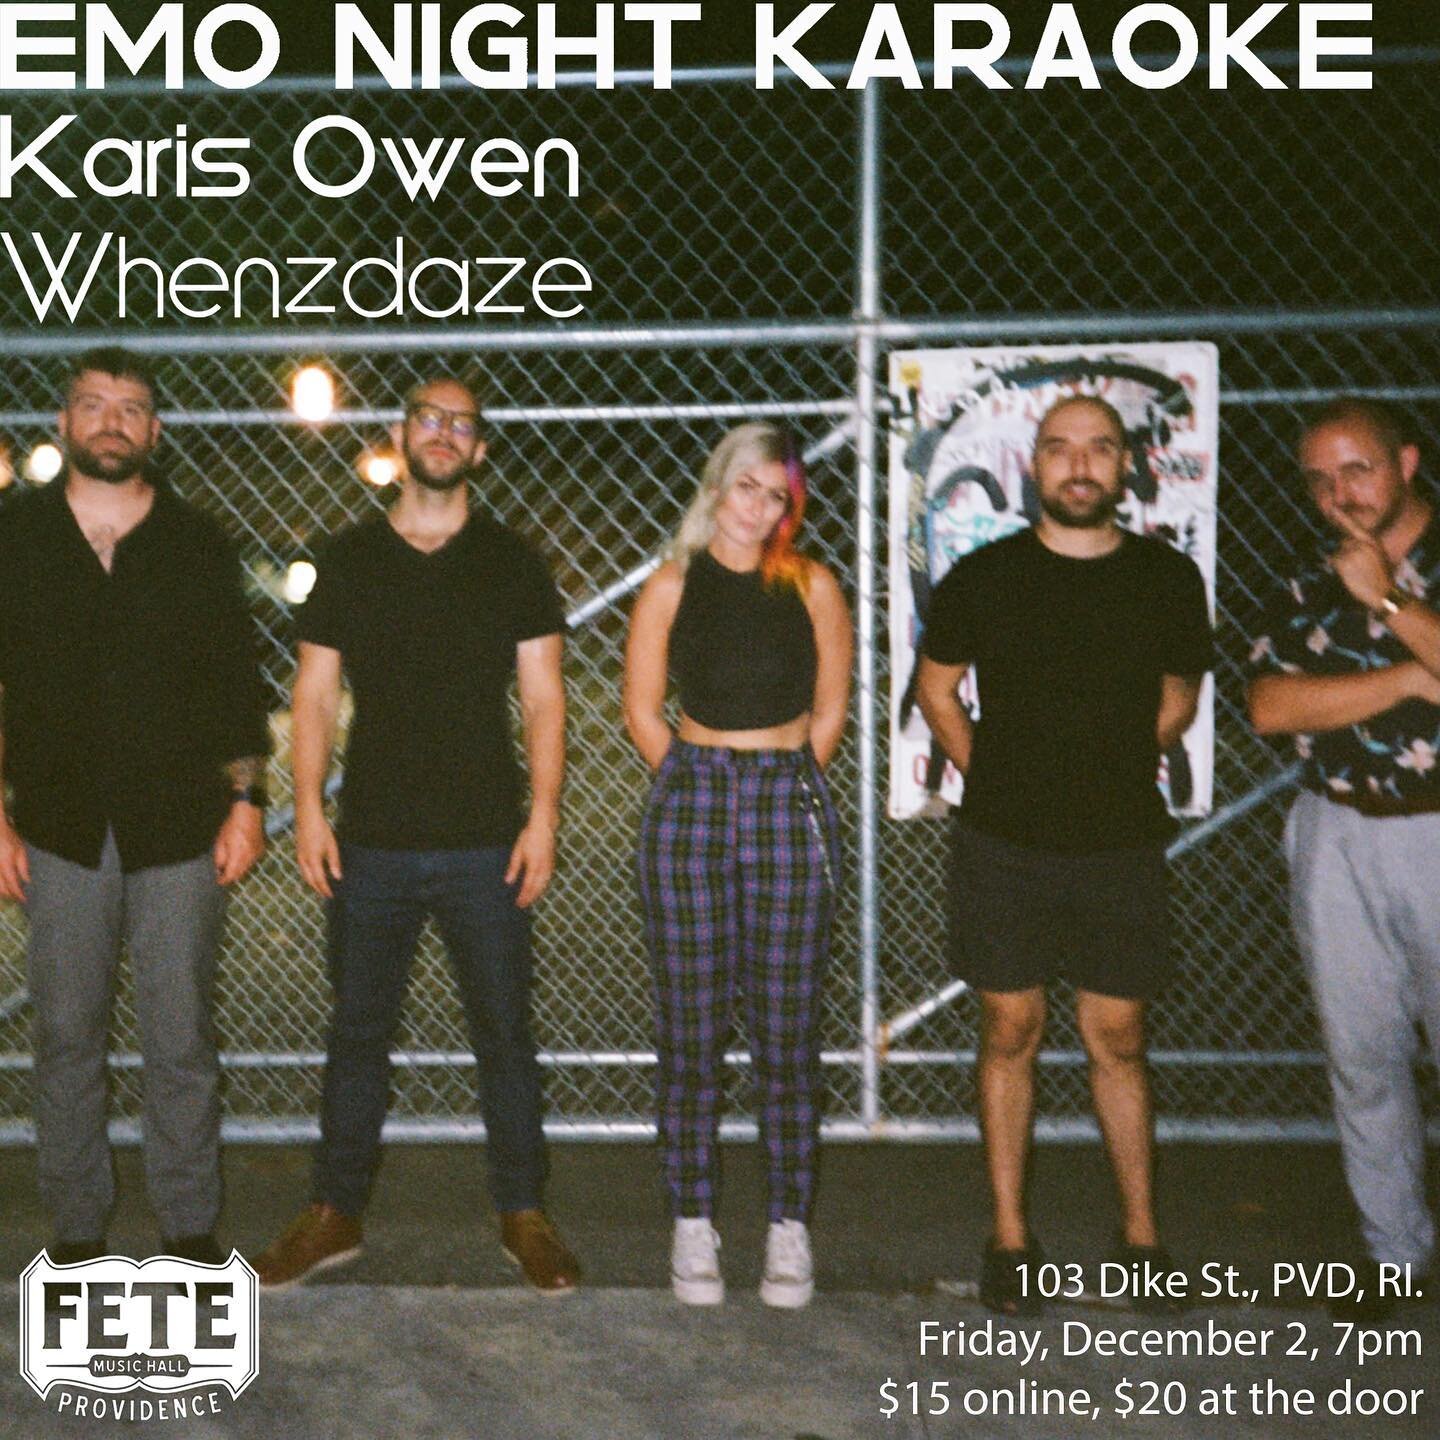 😱 The show is this Friday already!? 😳 
Ticket link is in our bio! Get there early coz @whenzdaze is opening and you don&rsquo;t wanna miss them! Then you can have a cigarette (or 5) during our set and catch @emonightkaraoke as headliner! See ya the